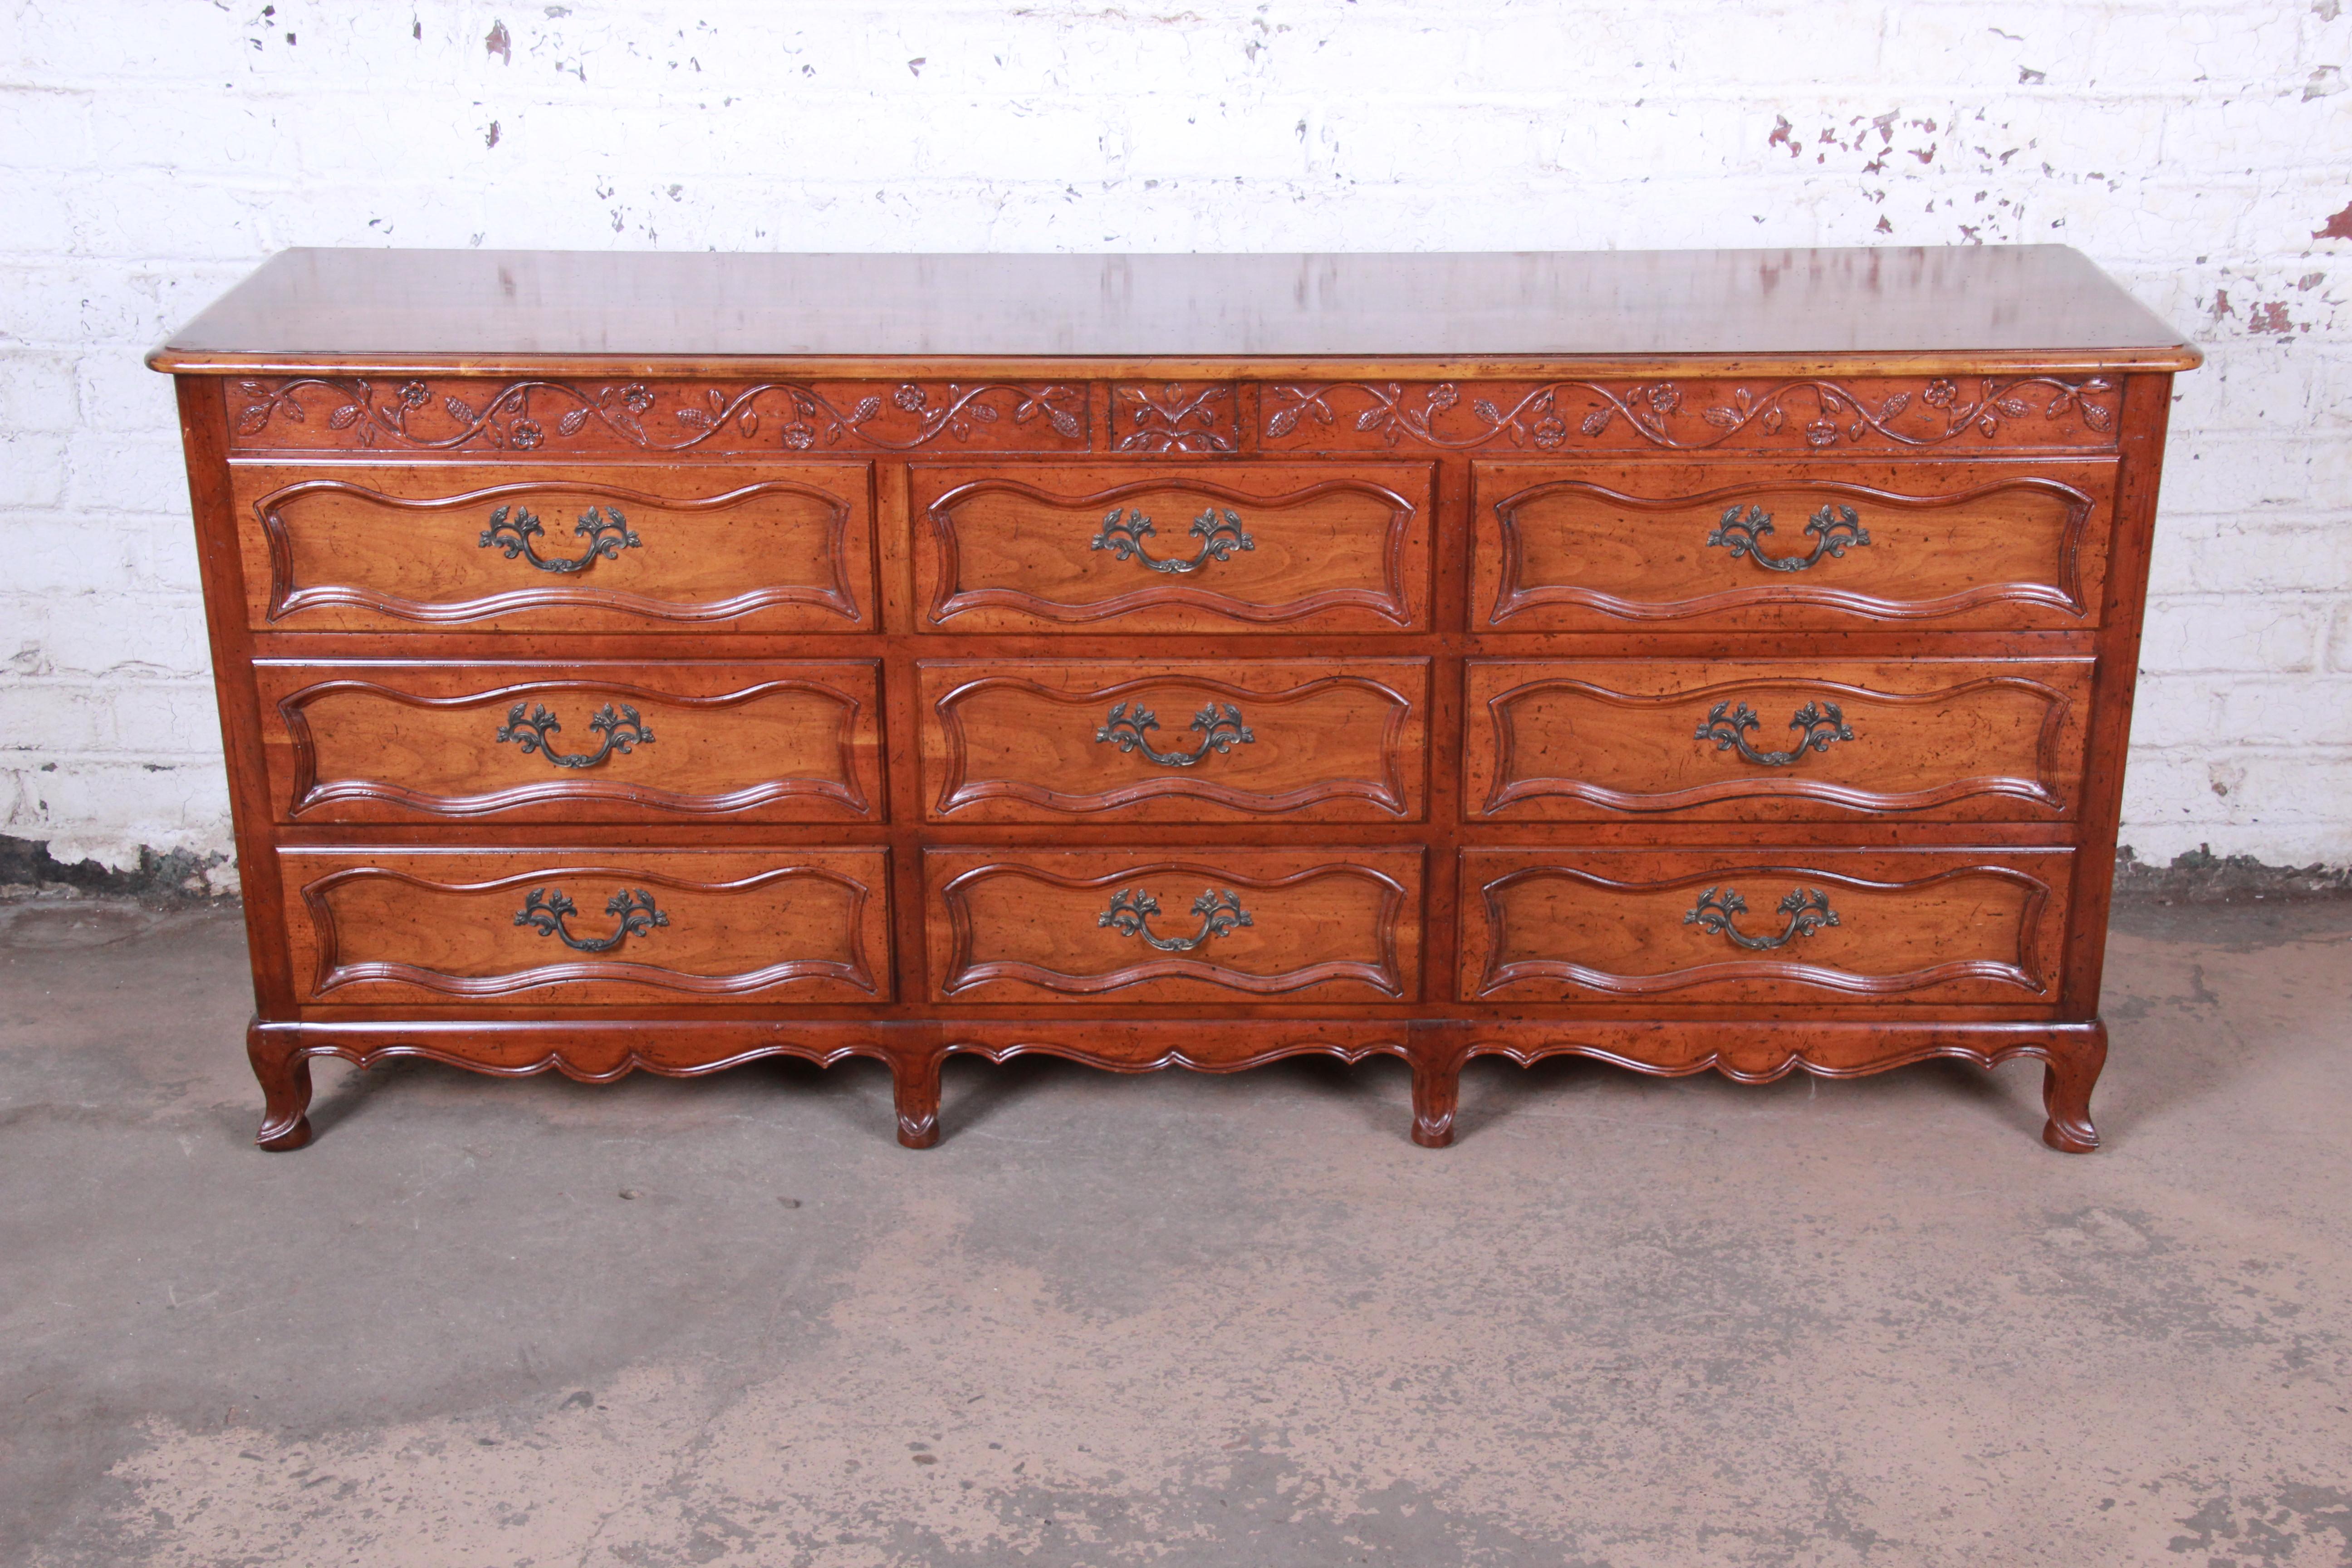 An exceptional French Provincial Louis XV style triple dresser or credenza from the Milling Road Collection by Baker Furniture. The dresser features gorgeous cherrywood grain with nice carved wood details. It offers ample storage, with nine deep